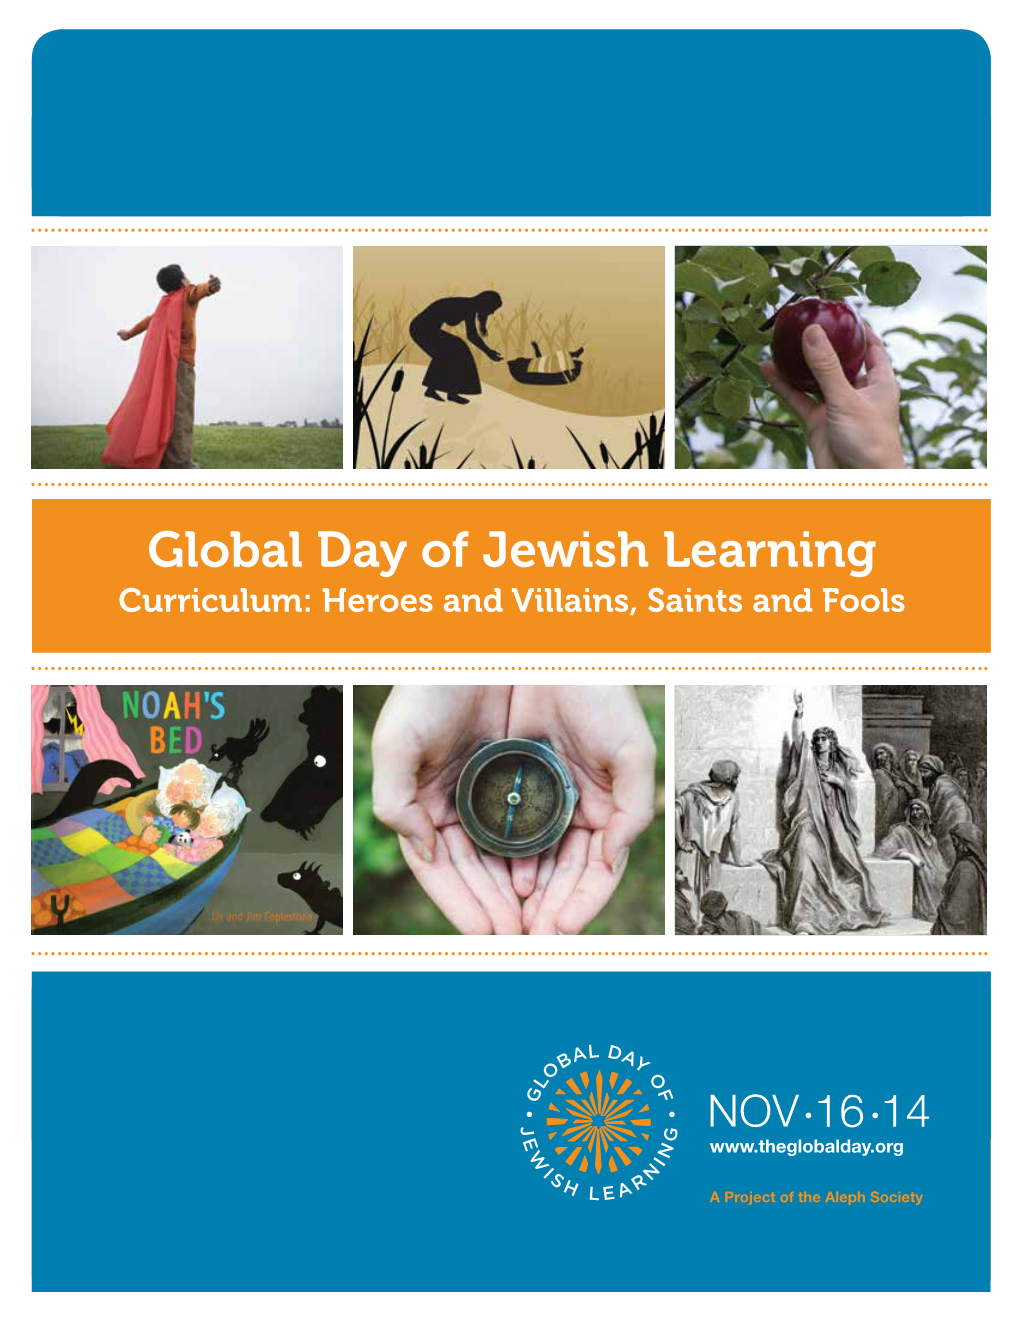 Global Day of Jewish Learning Curriculum: Heroes and Villains, Saints and Fools